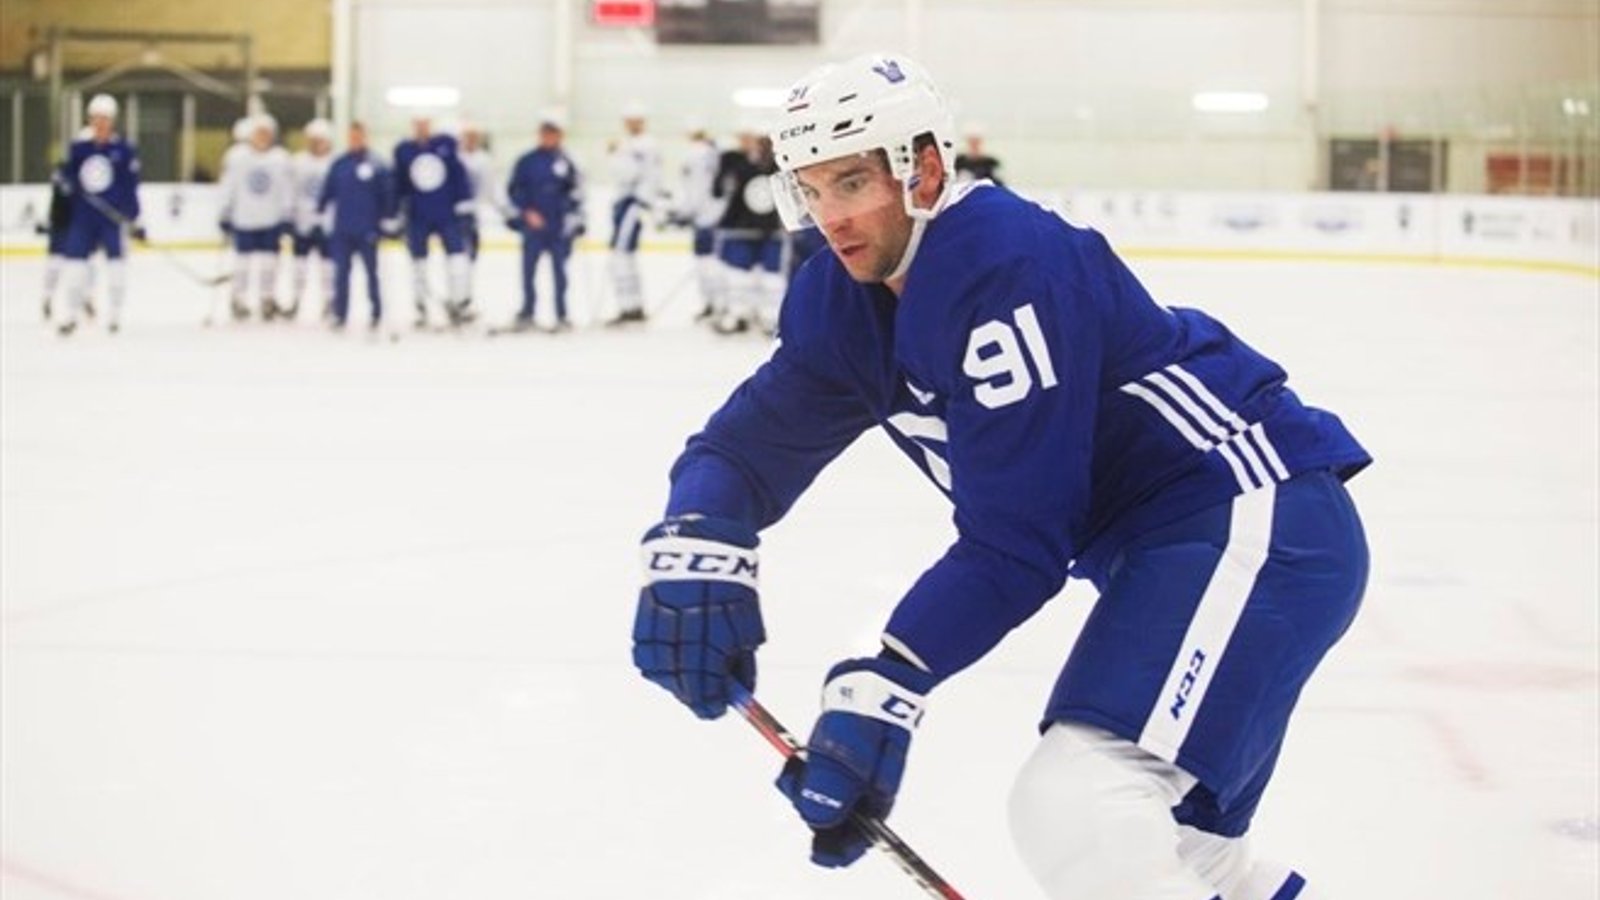 Leafs players get tested for COVID-19 